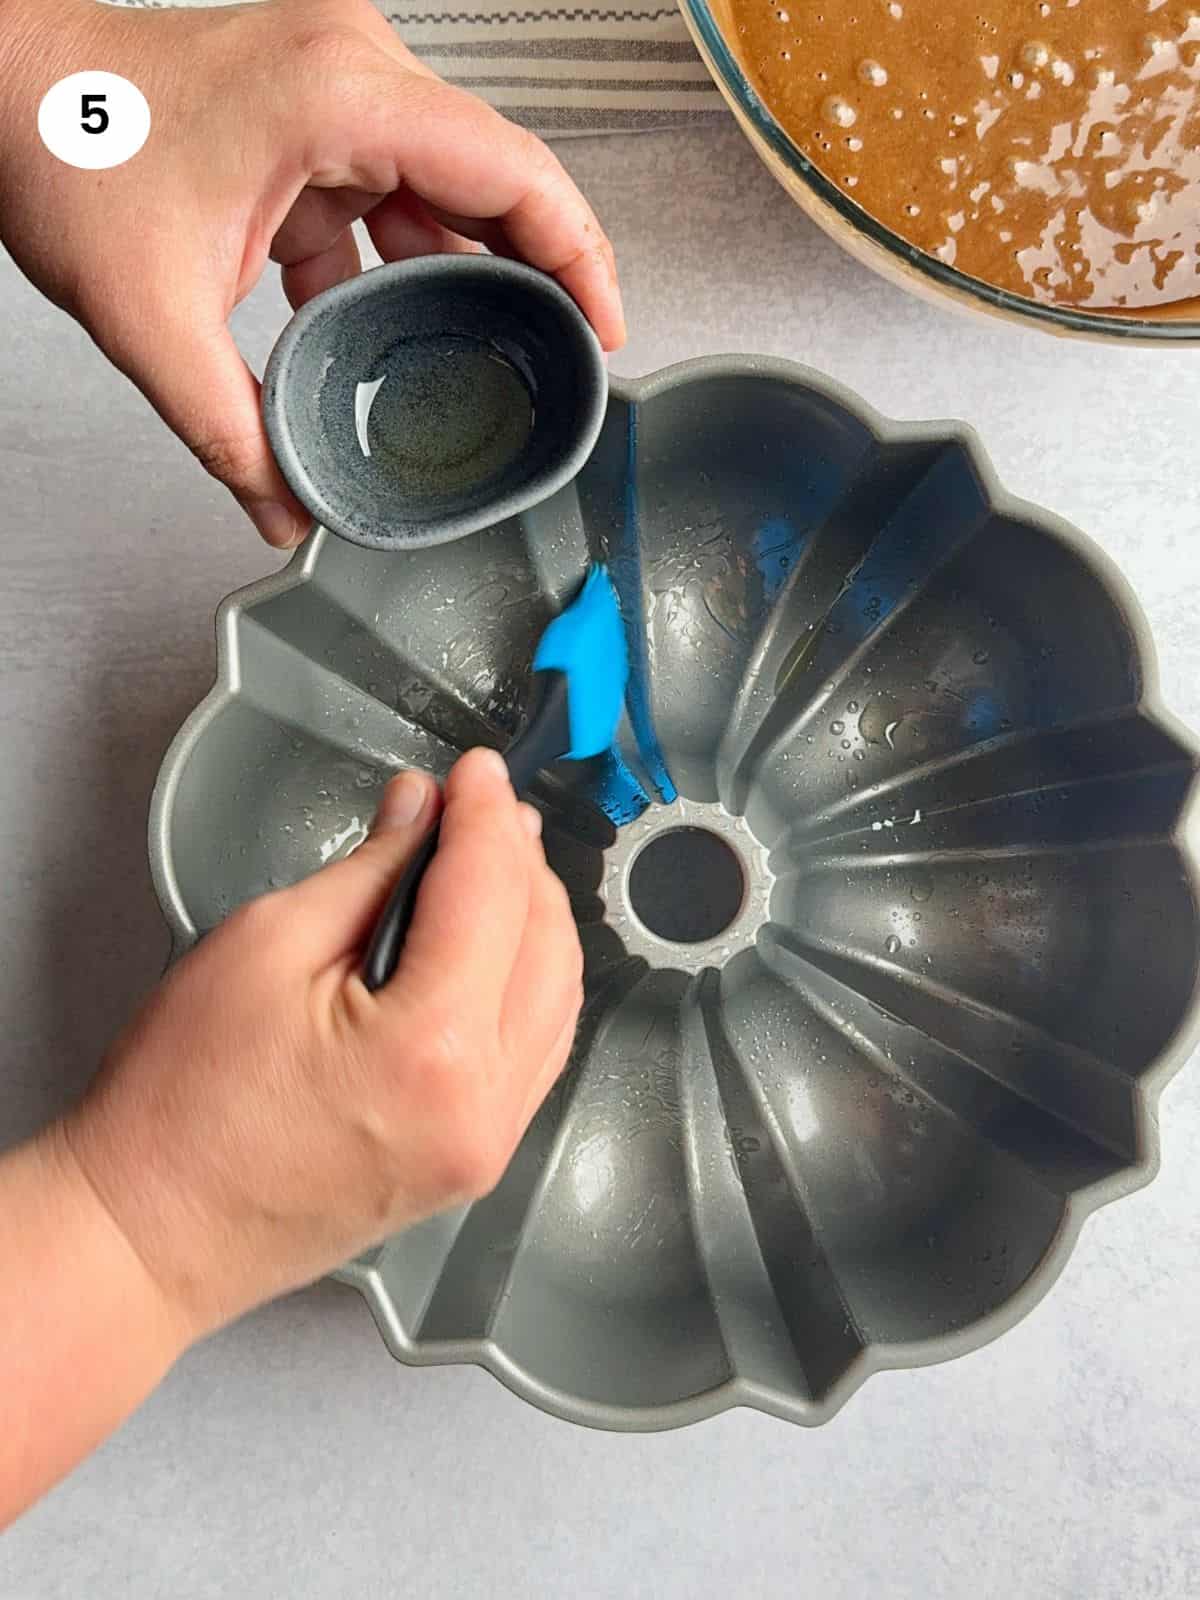 Oiling the bundt cake pan before adding the batter.